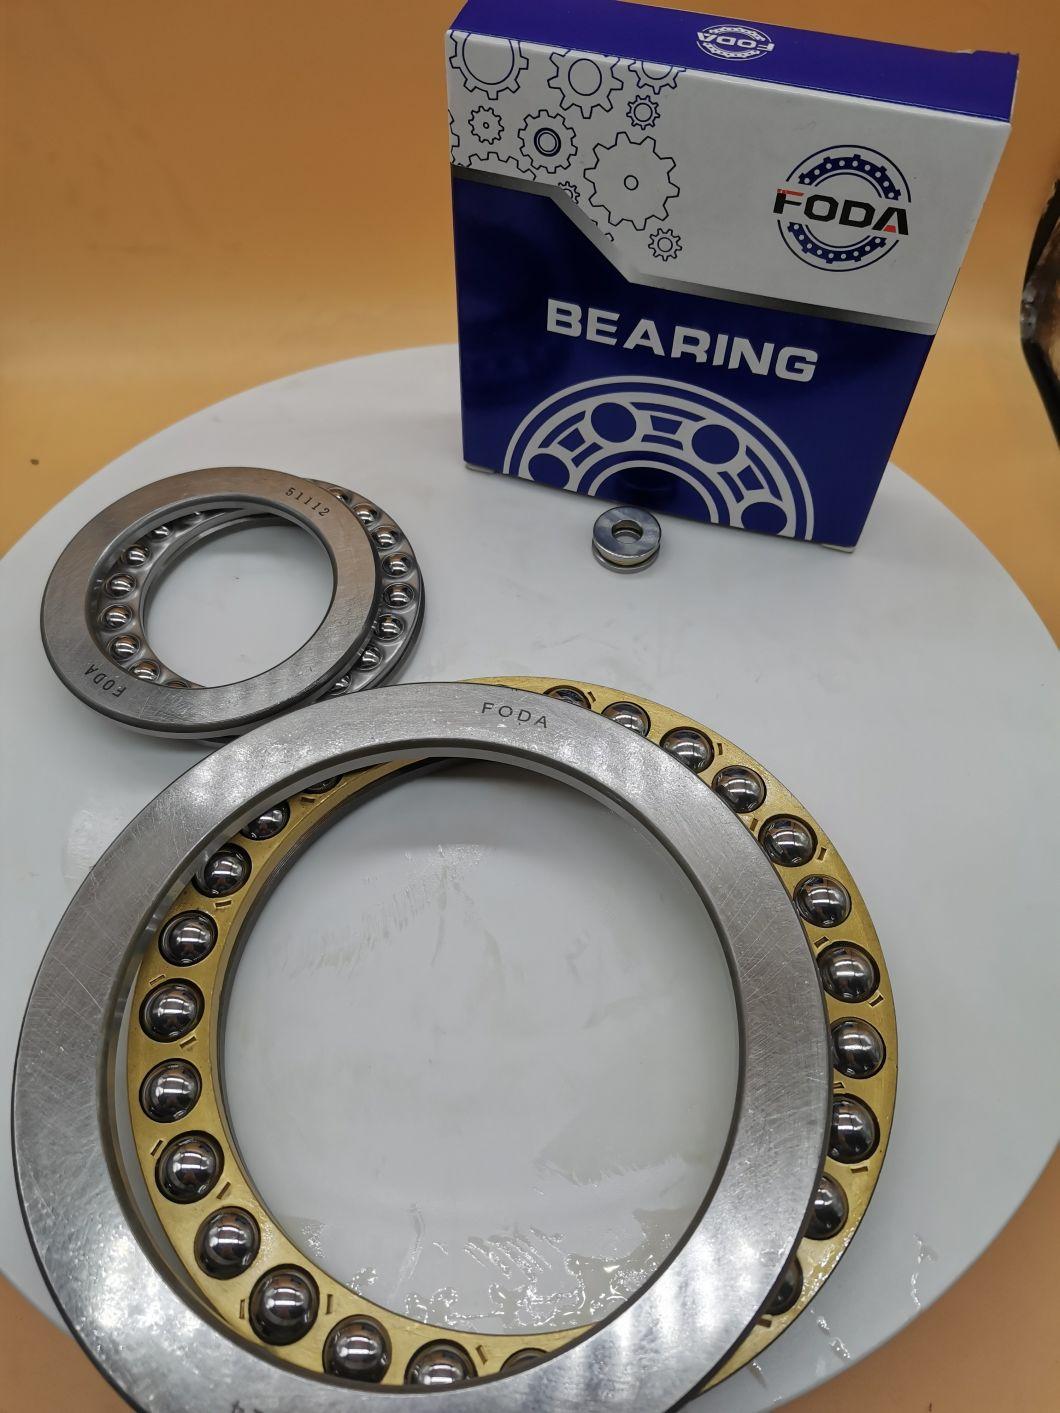 Unidirectional Thrust Ball Bearings/Low Speed Reducer/Foda High Quality Bearings Instead of Koyo/ Bearings/Thrust Ball Bearings of 51415